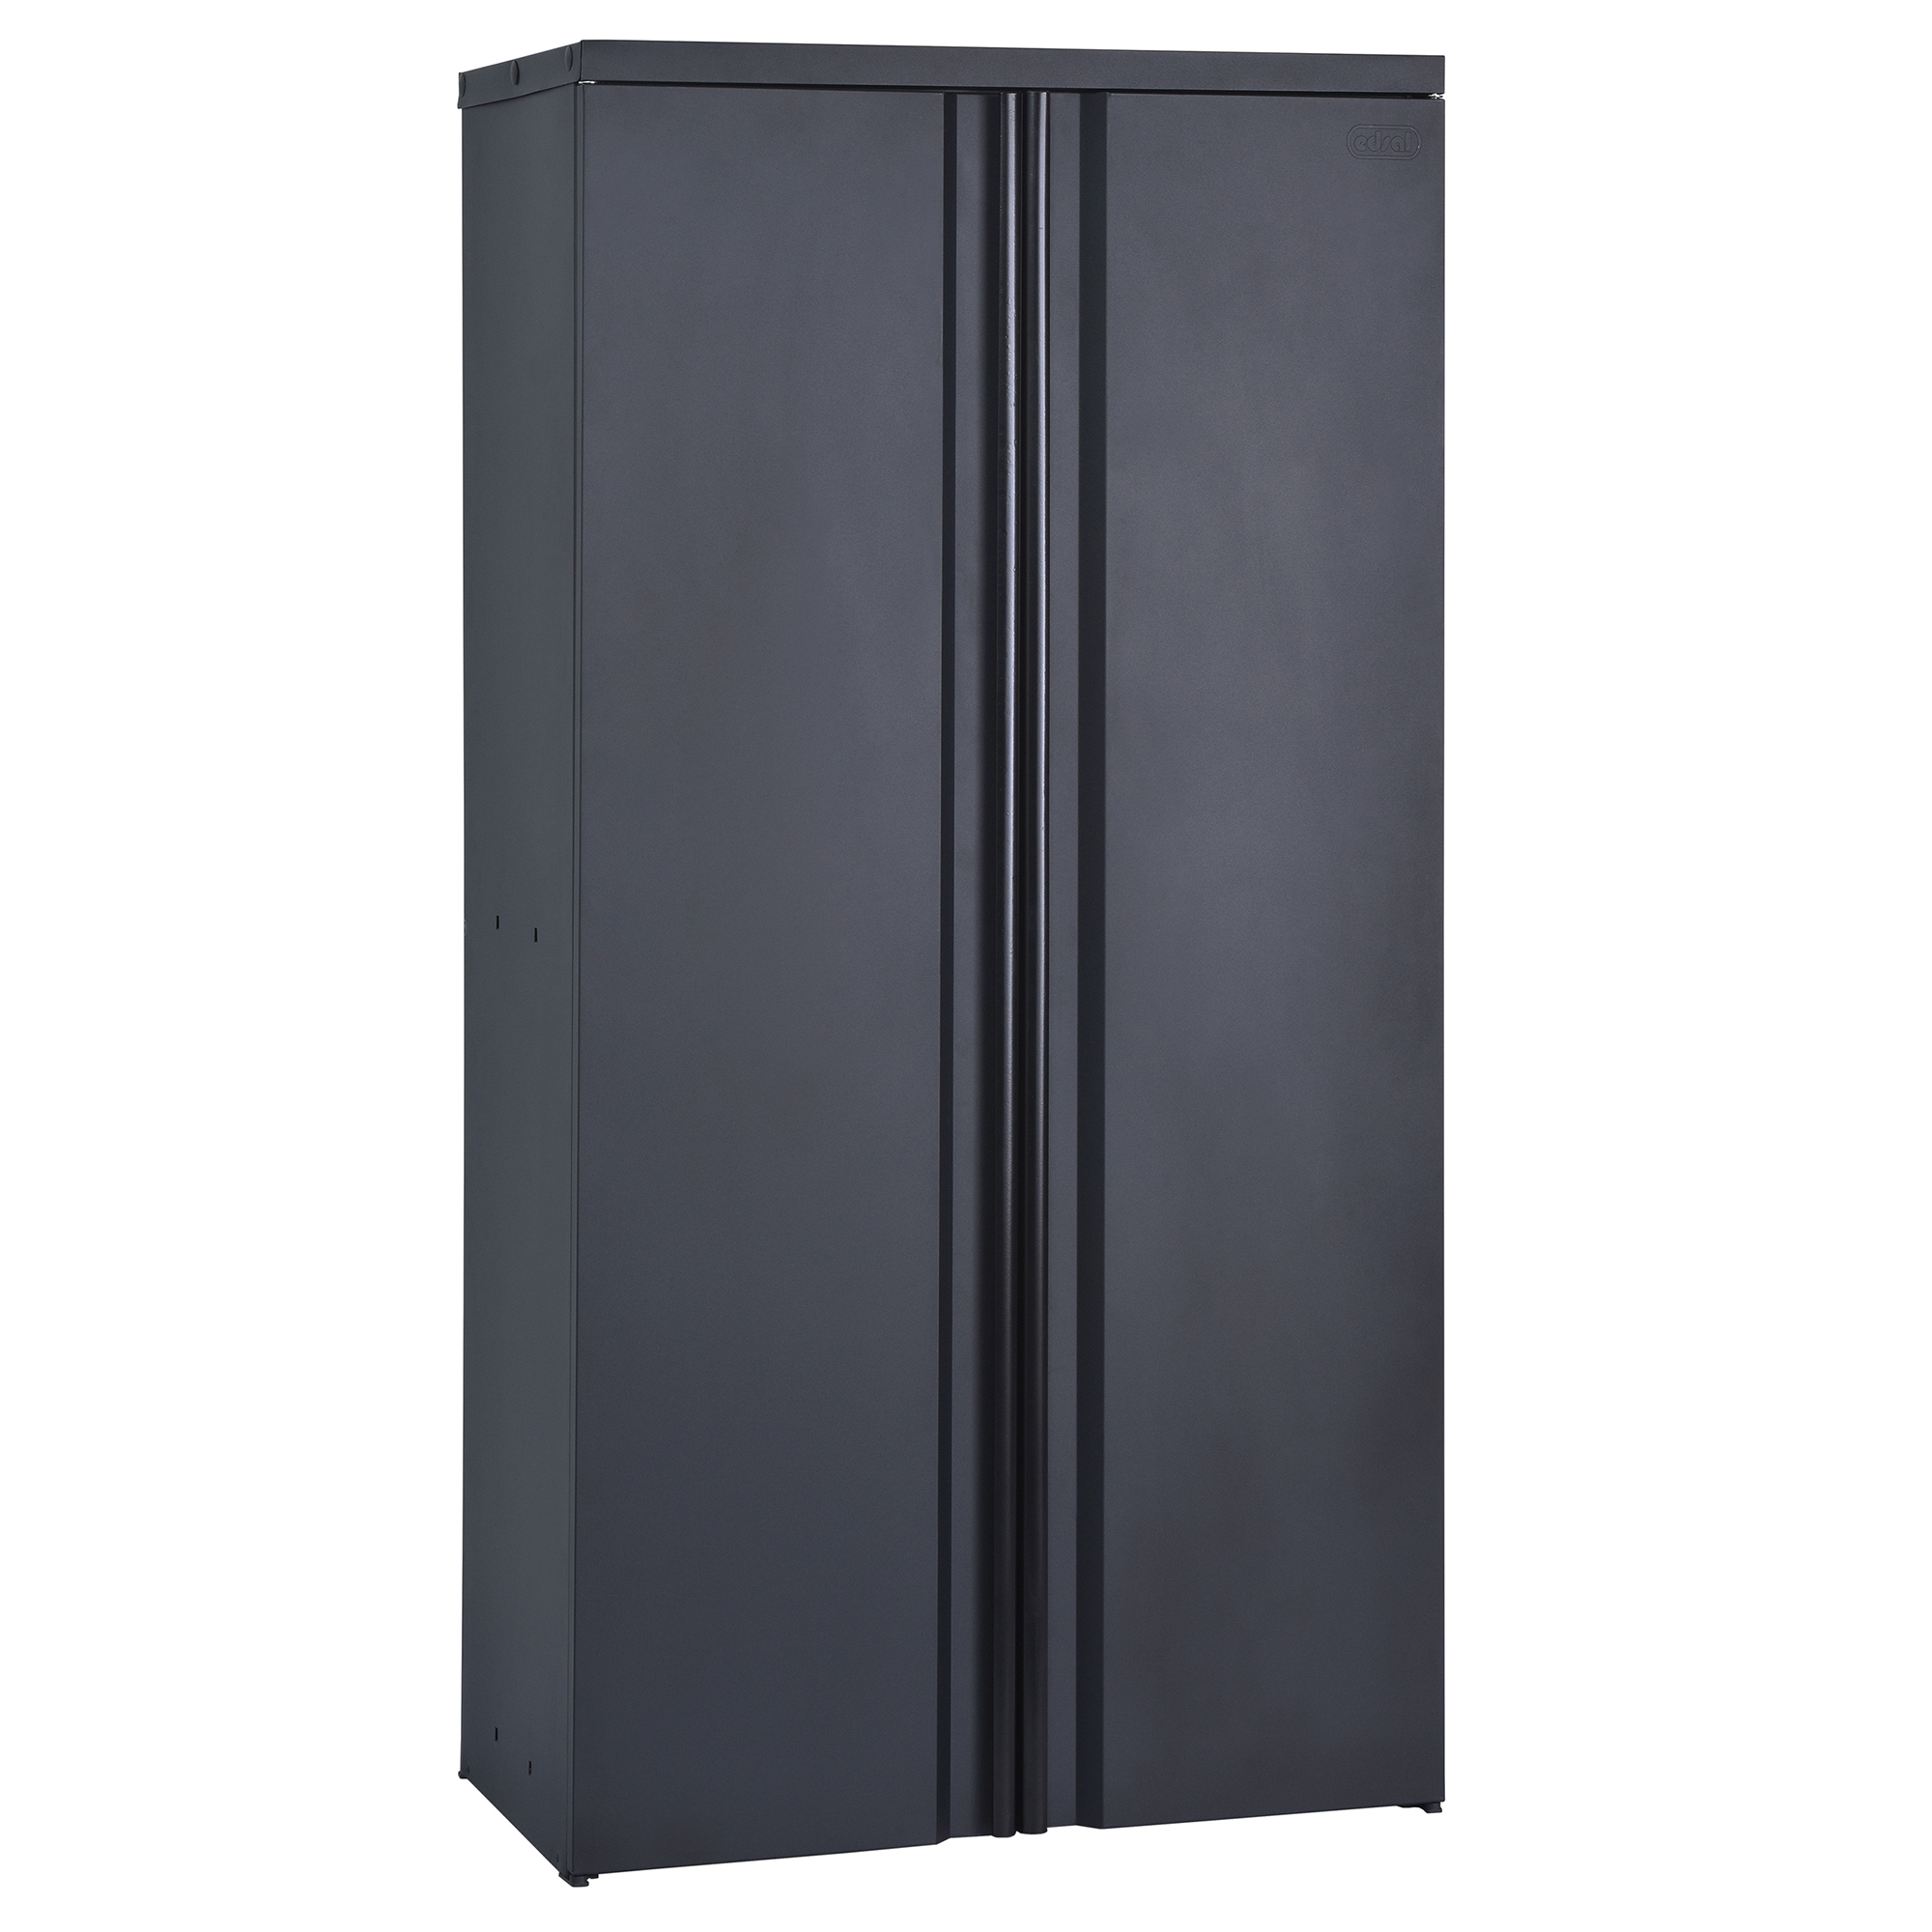 Edsal, Ready To Assemble Cabinet 36Inch Wx18Inch Dx72Inch H - Black, Height 72 in, Width 18 in, Color Black, Model - Sandusky Lee RTA361872-BLK